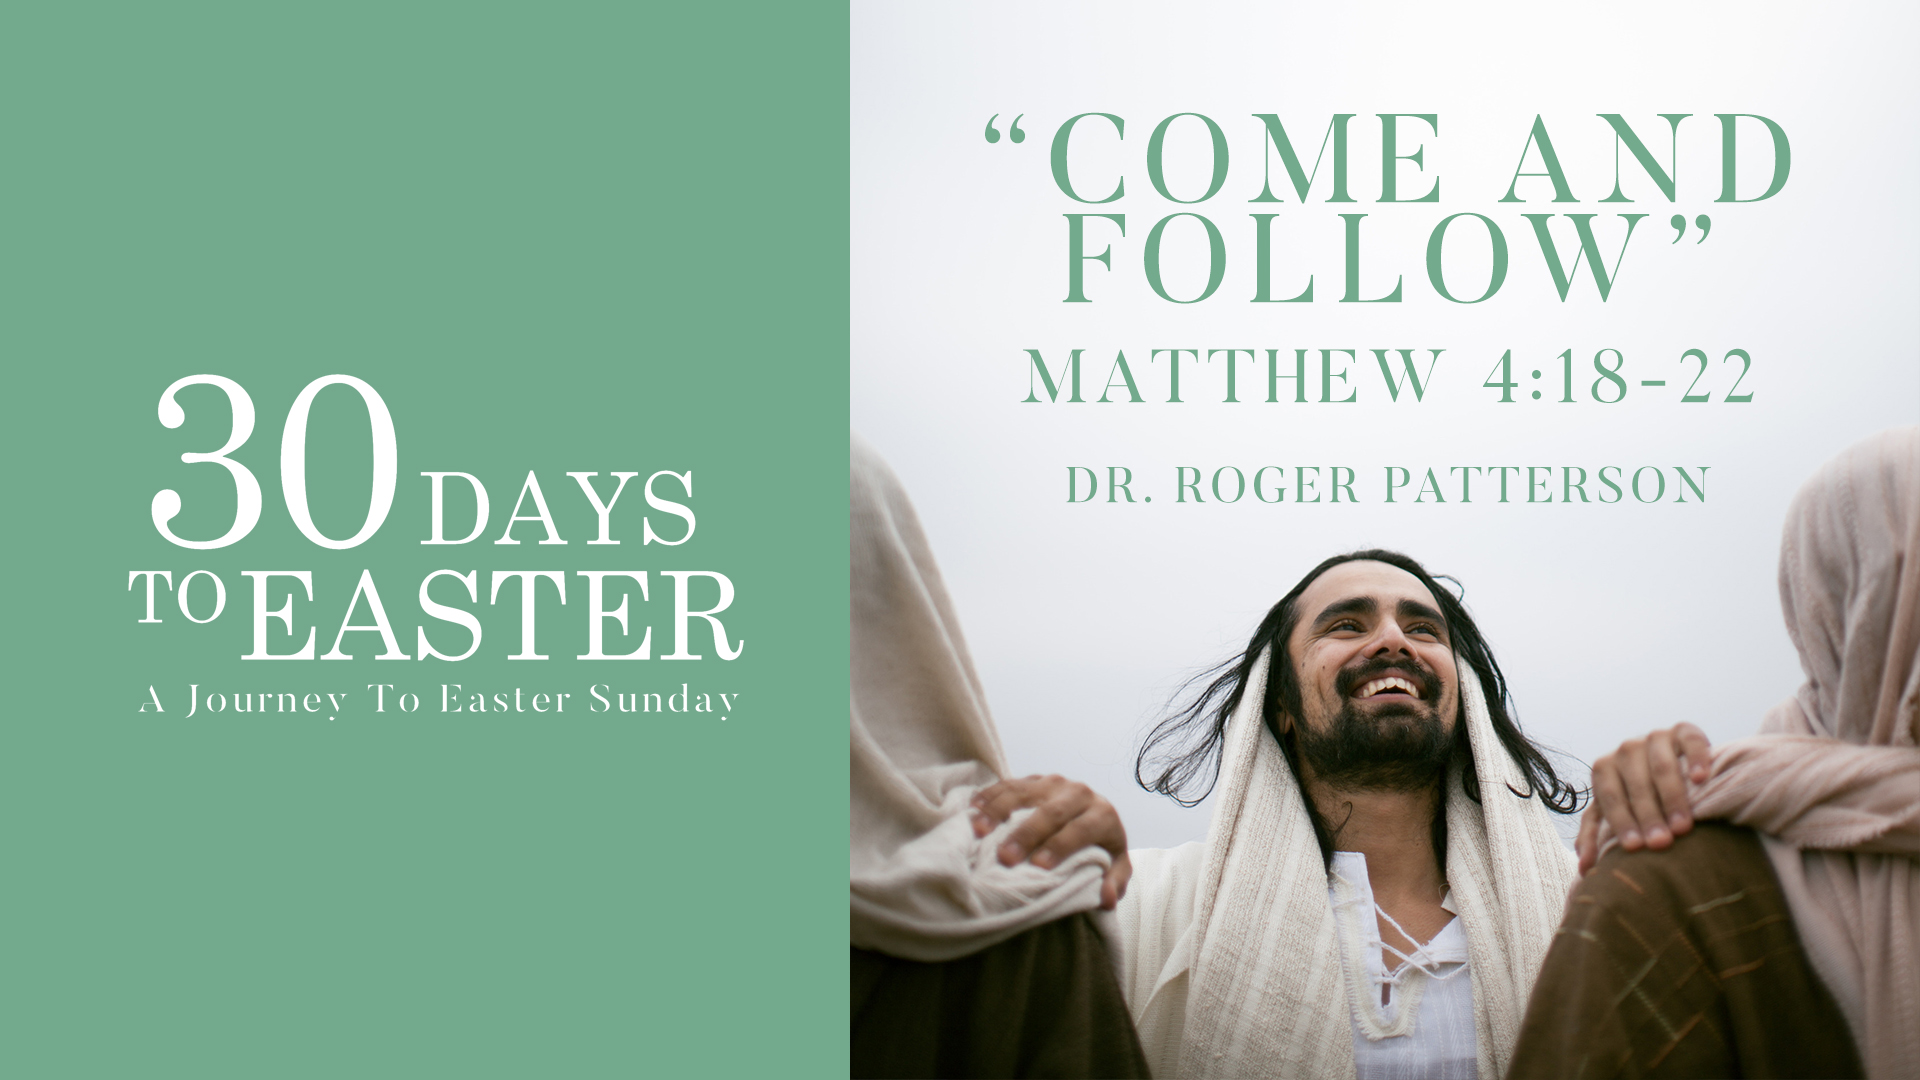 “Come and Follow” // Matthew 4:18-22